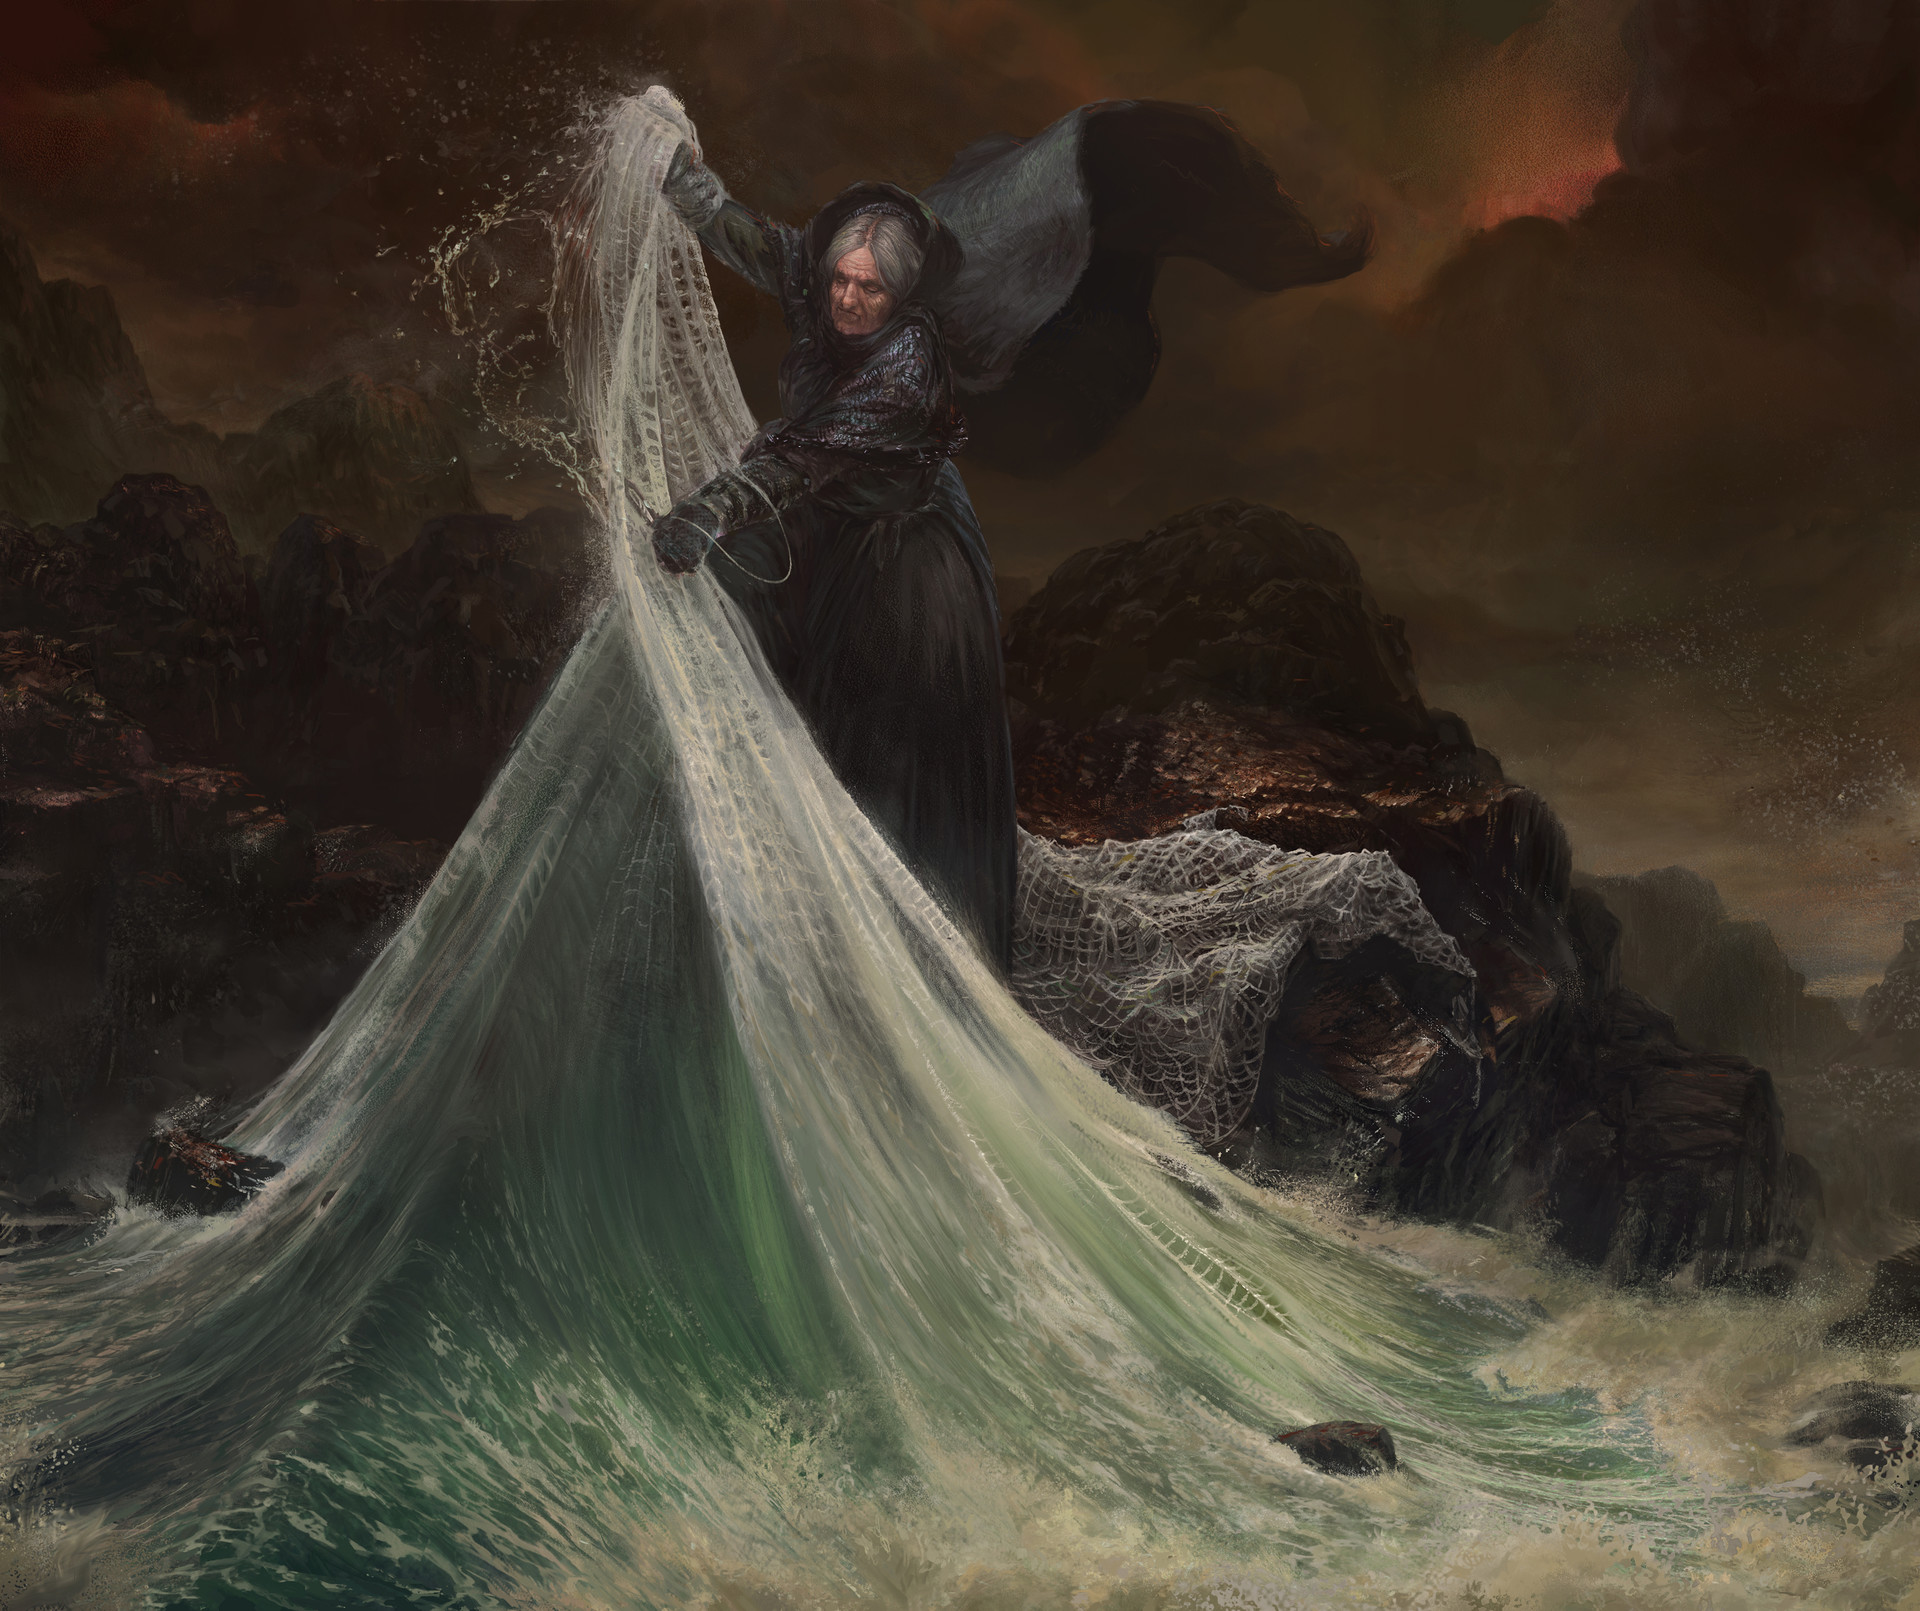 Narrative Painting - Adrien Amilhat, The Sea Witch, c.2017